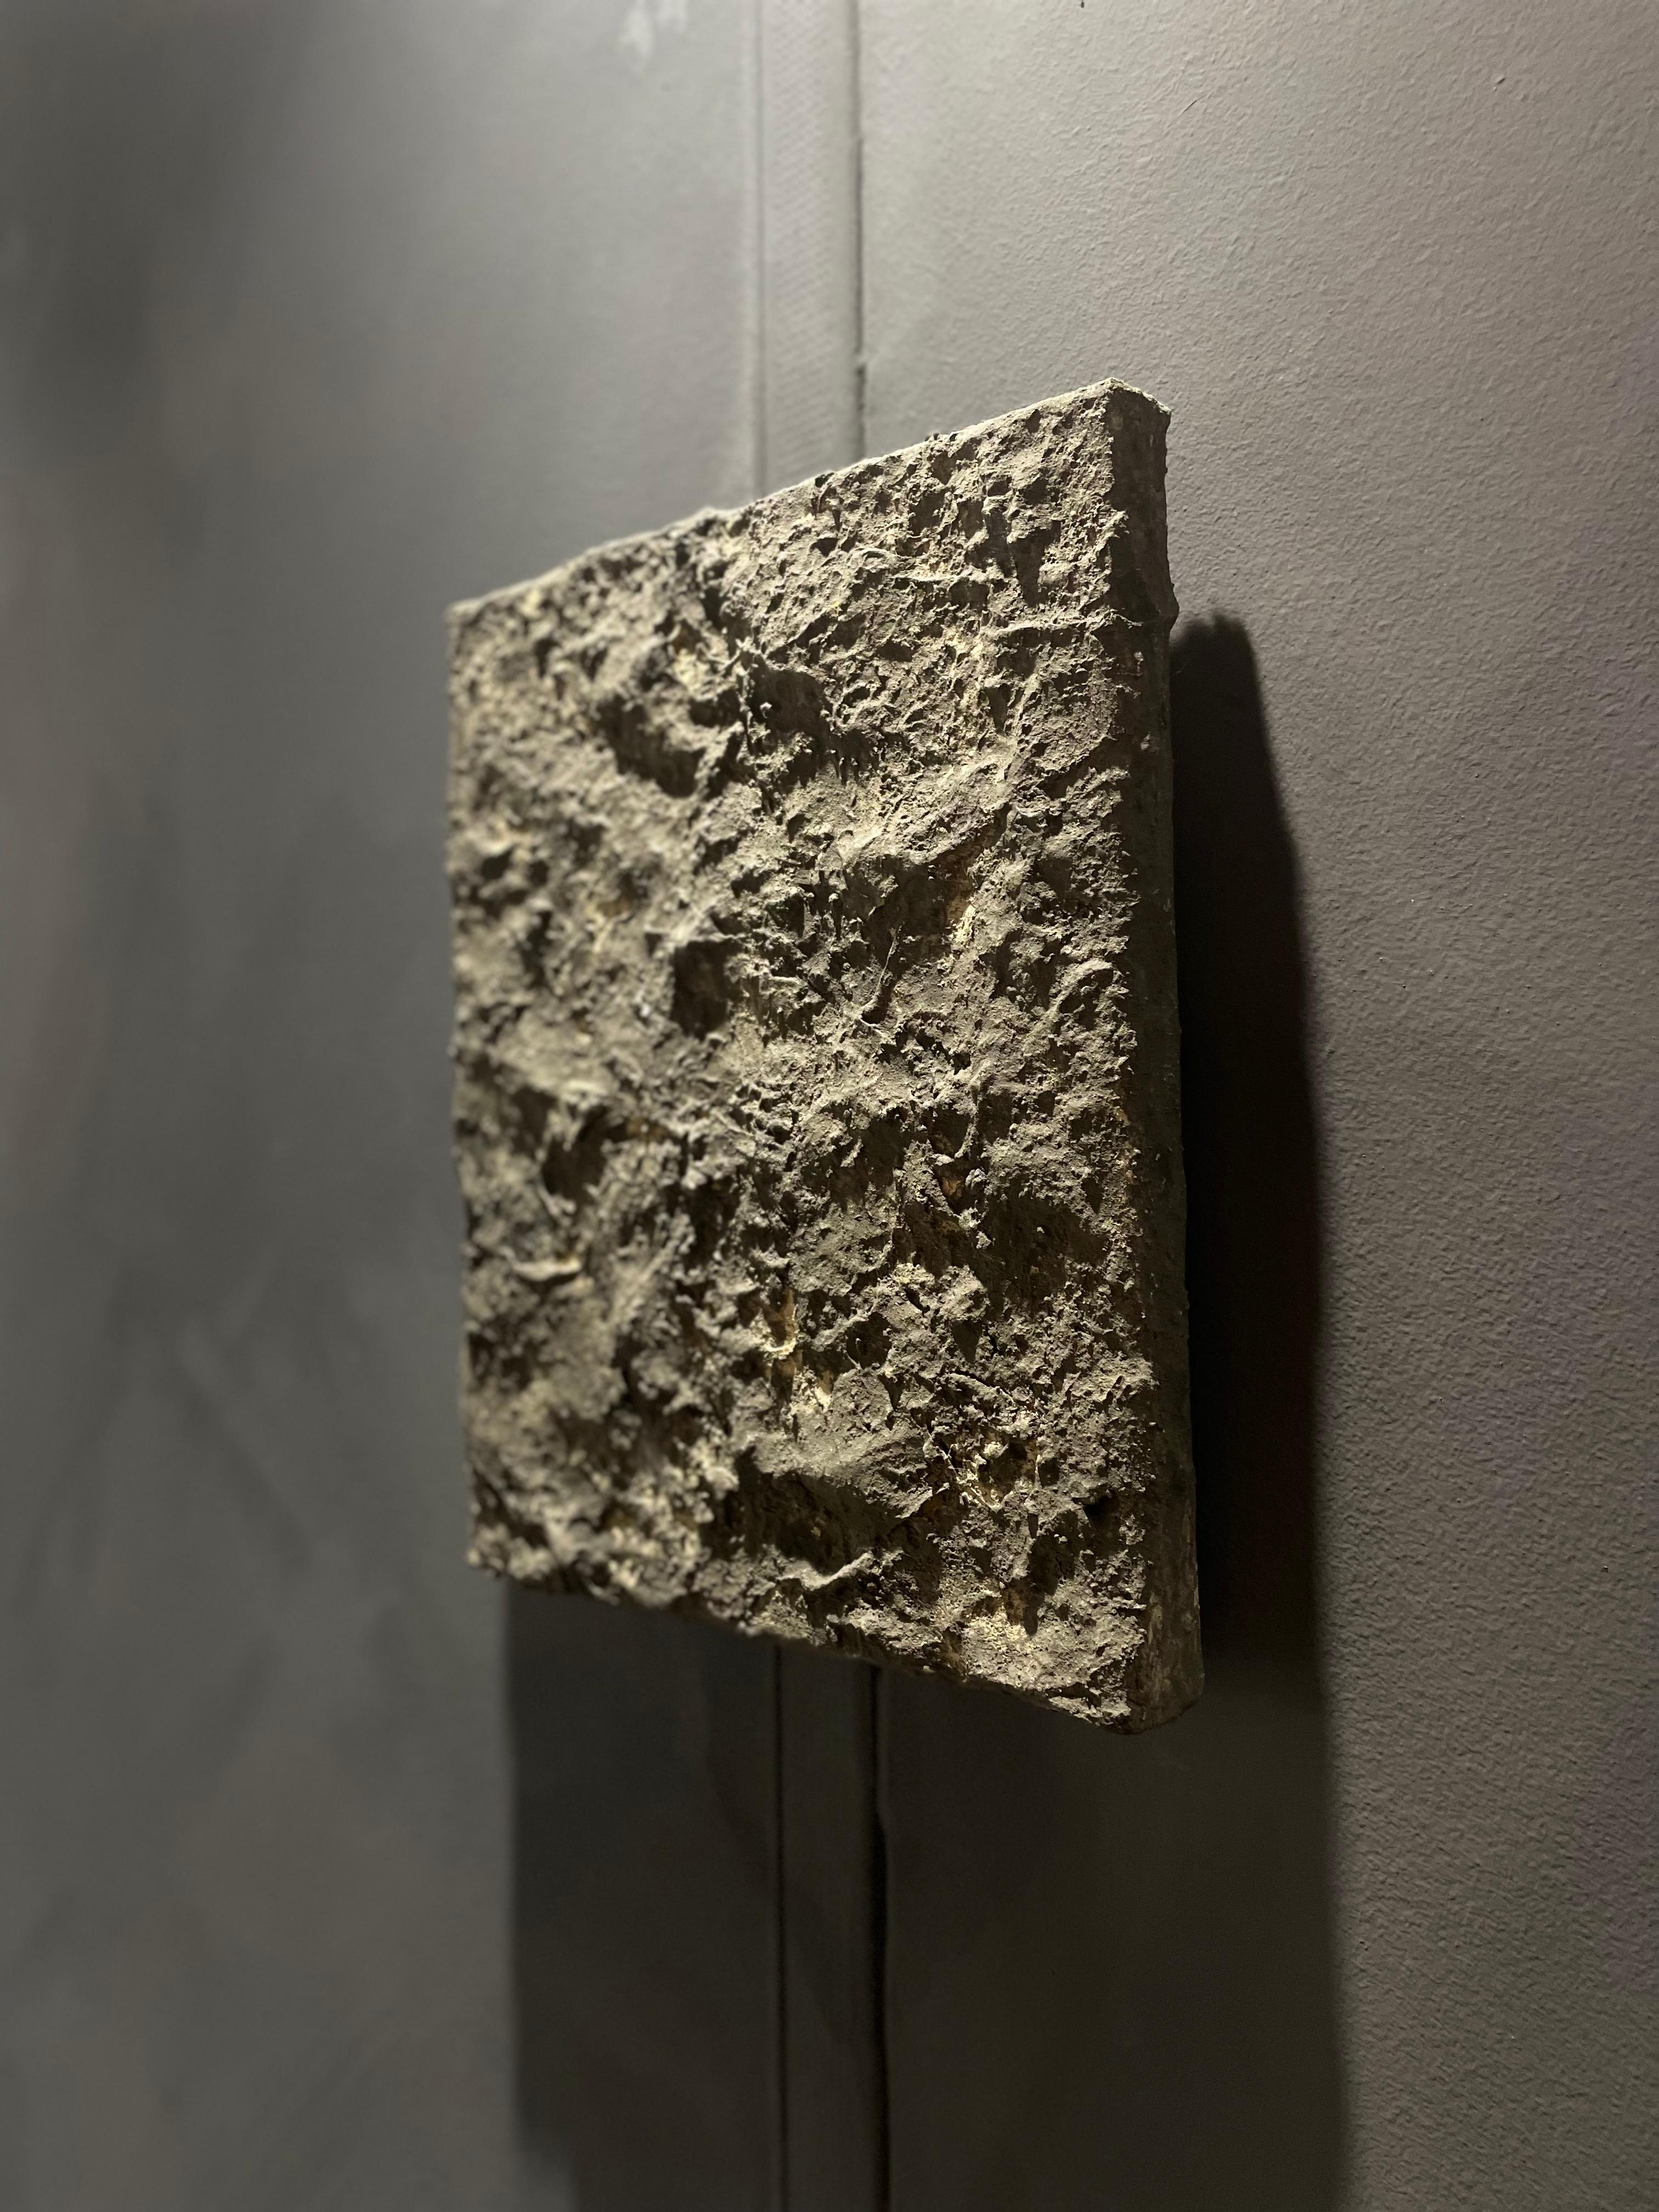 Wataru Hatano's work is made from the Kurotani washi, a traditional Japanese paper. Washi is hand-made by first separating the inner bark of the plant and pounding it. This pounded version of the Kozo inner bark is added to a liquid solution and